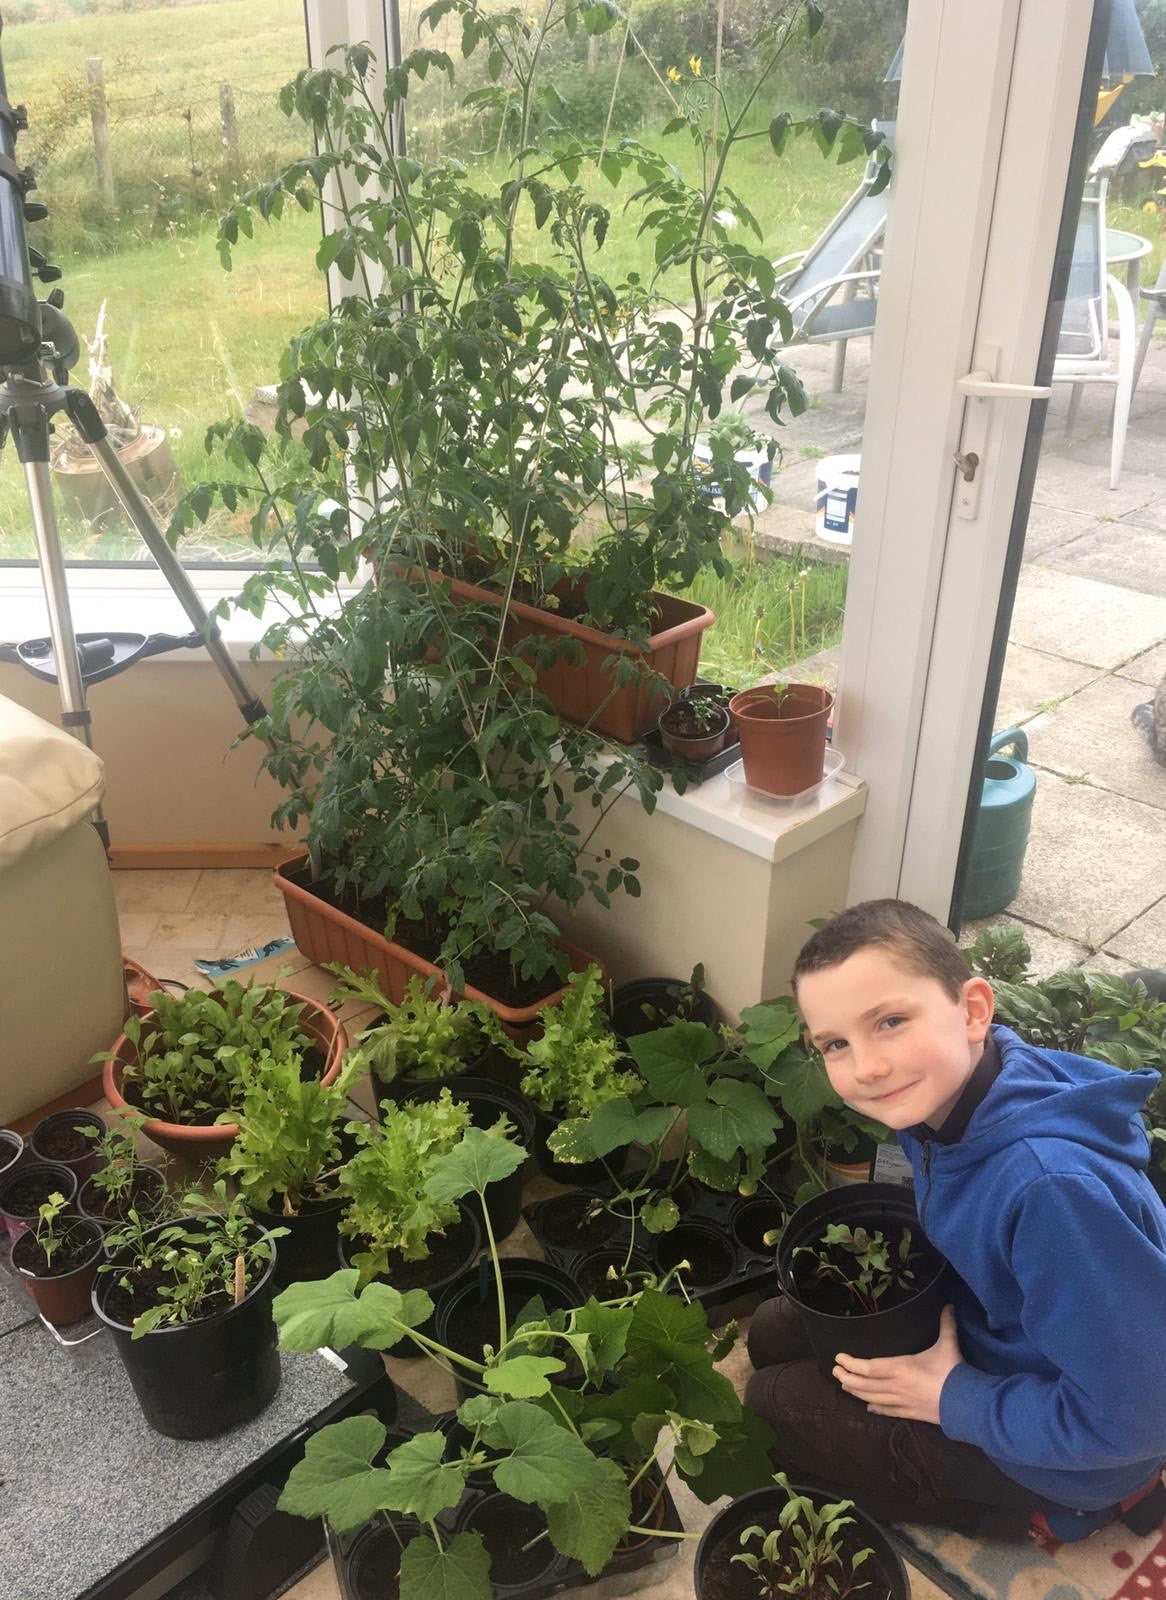 Sinead Kavanagh's 9 year old son enjoying New leaf Compost products during lockdown